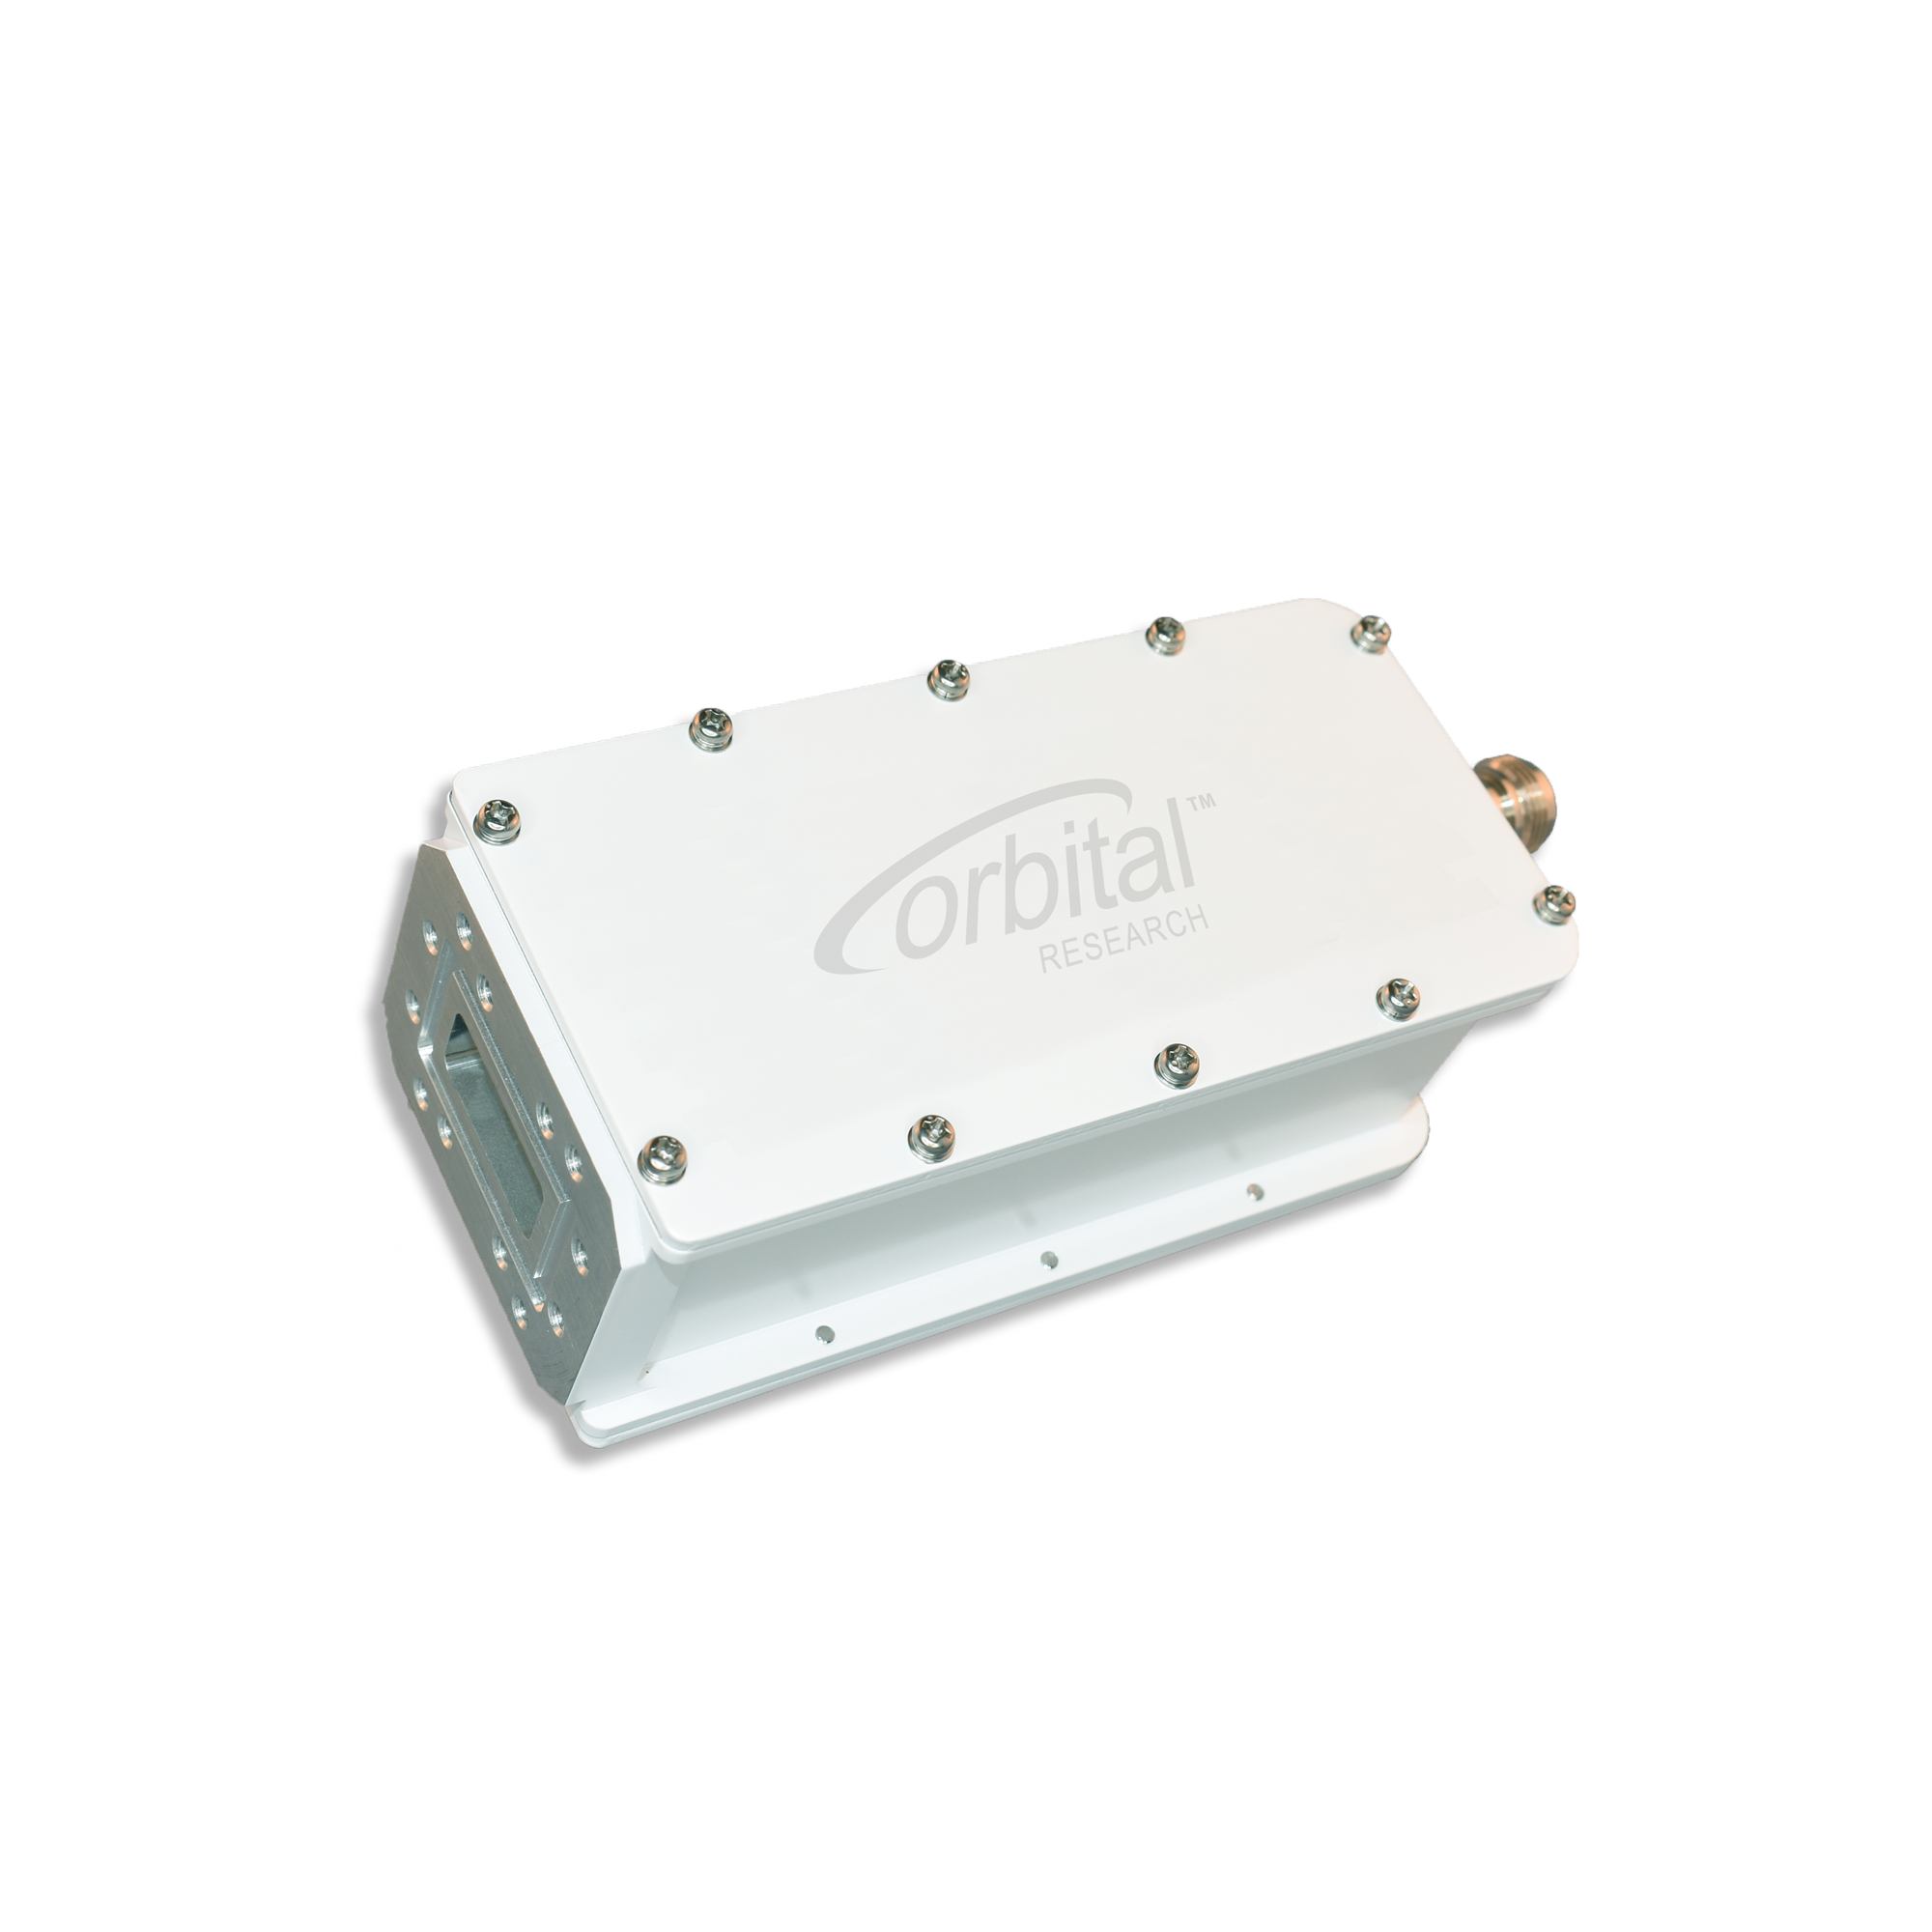 Satellite Communication X-MIC Low Noise Block Downconverter with Internal Isolator and External Reference. This LNB has a microwave circulator.